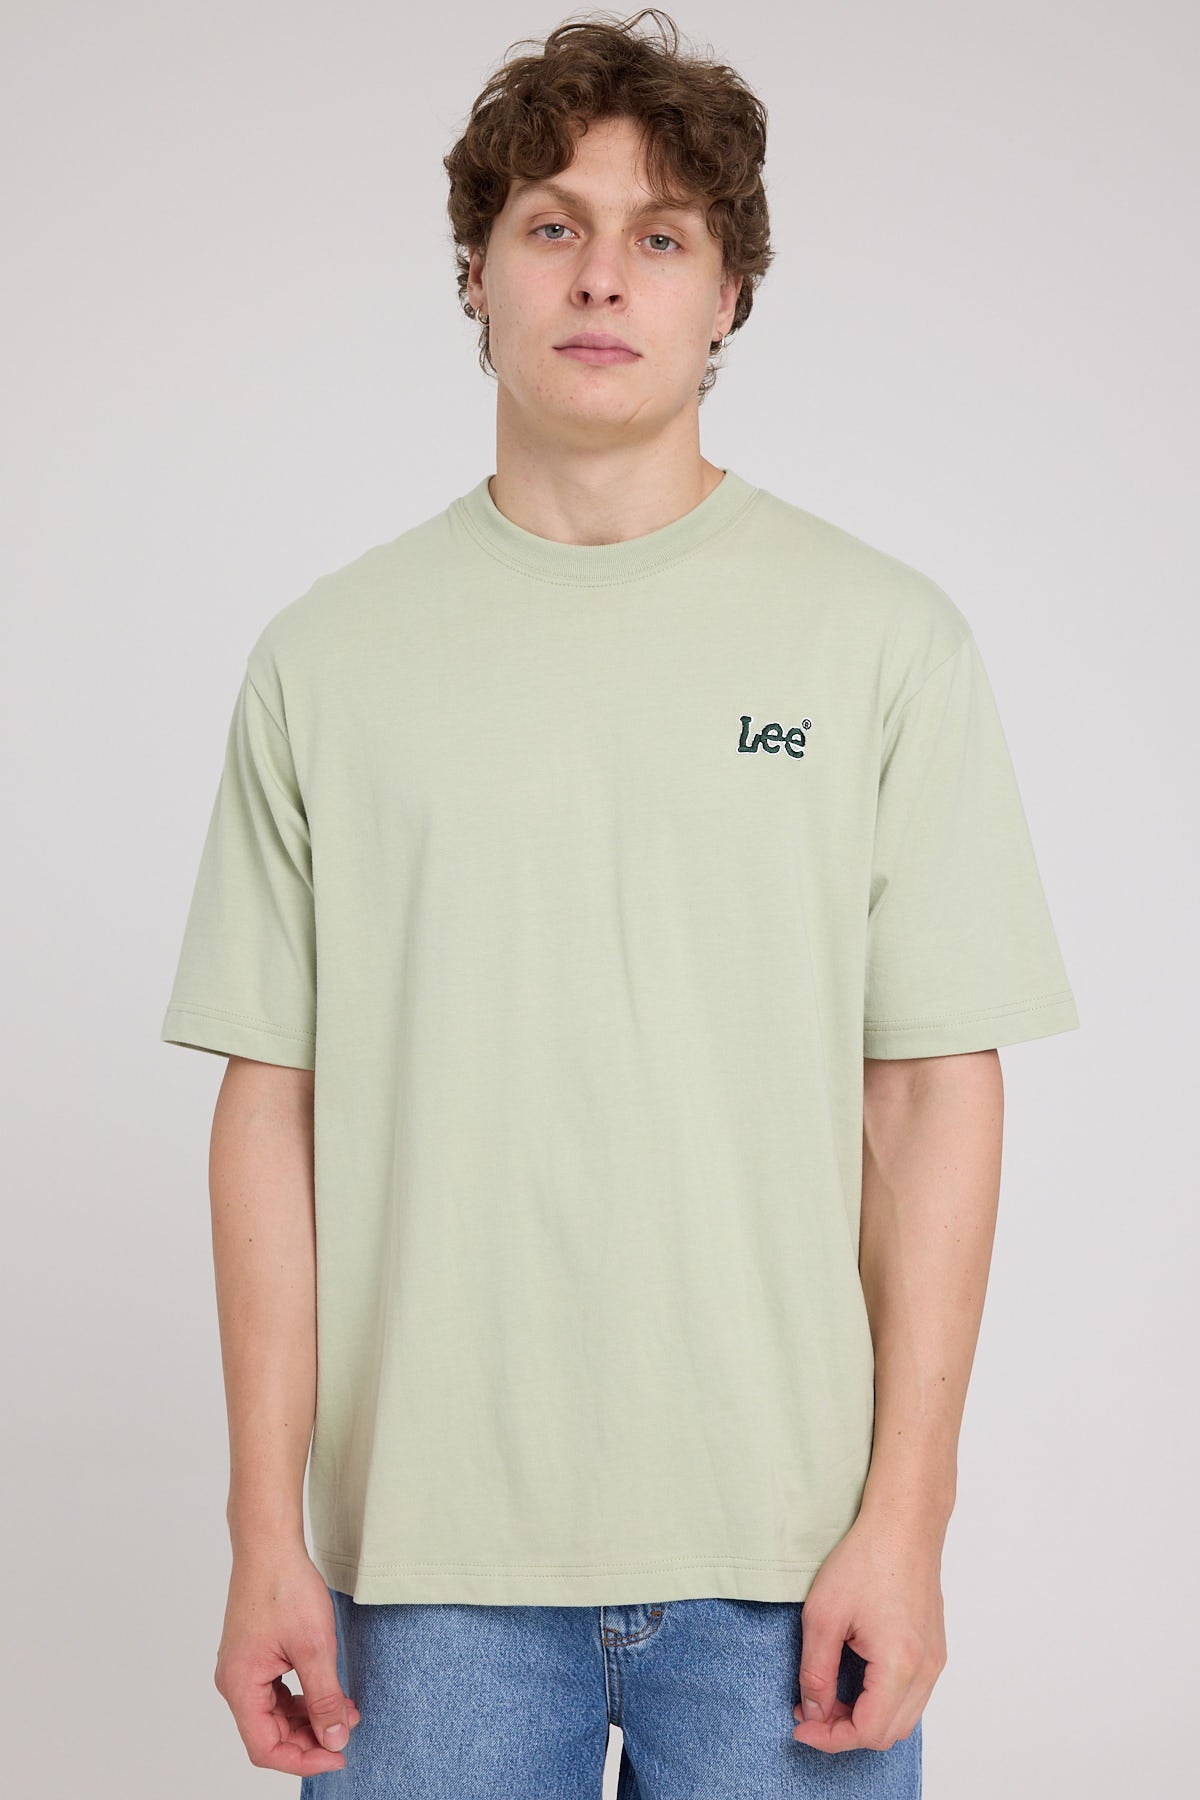 Lee Twitch Baggy Tee Desert Stage